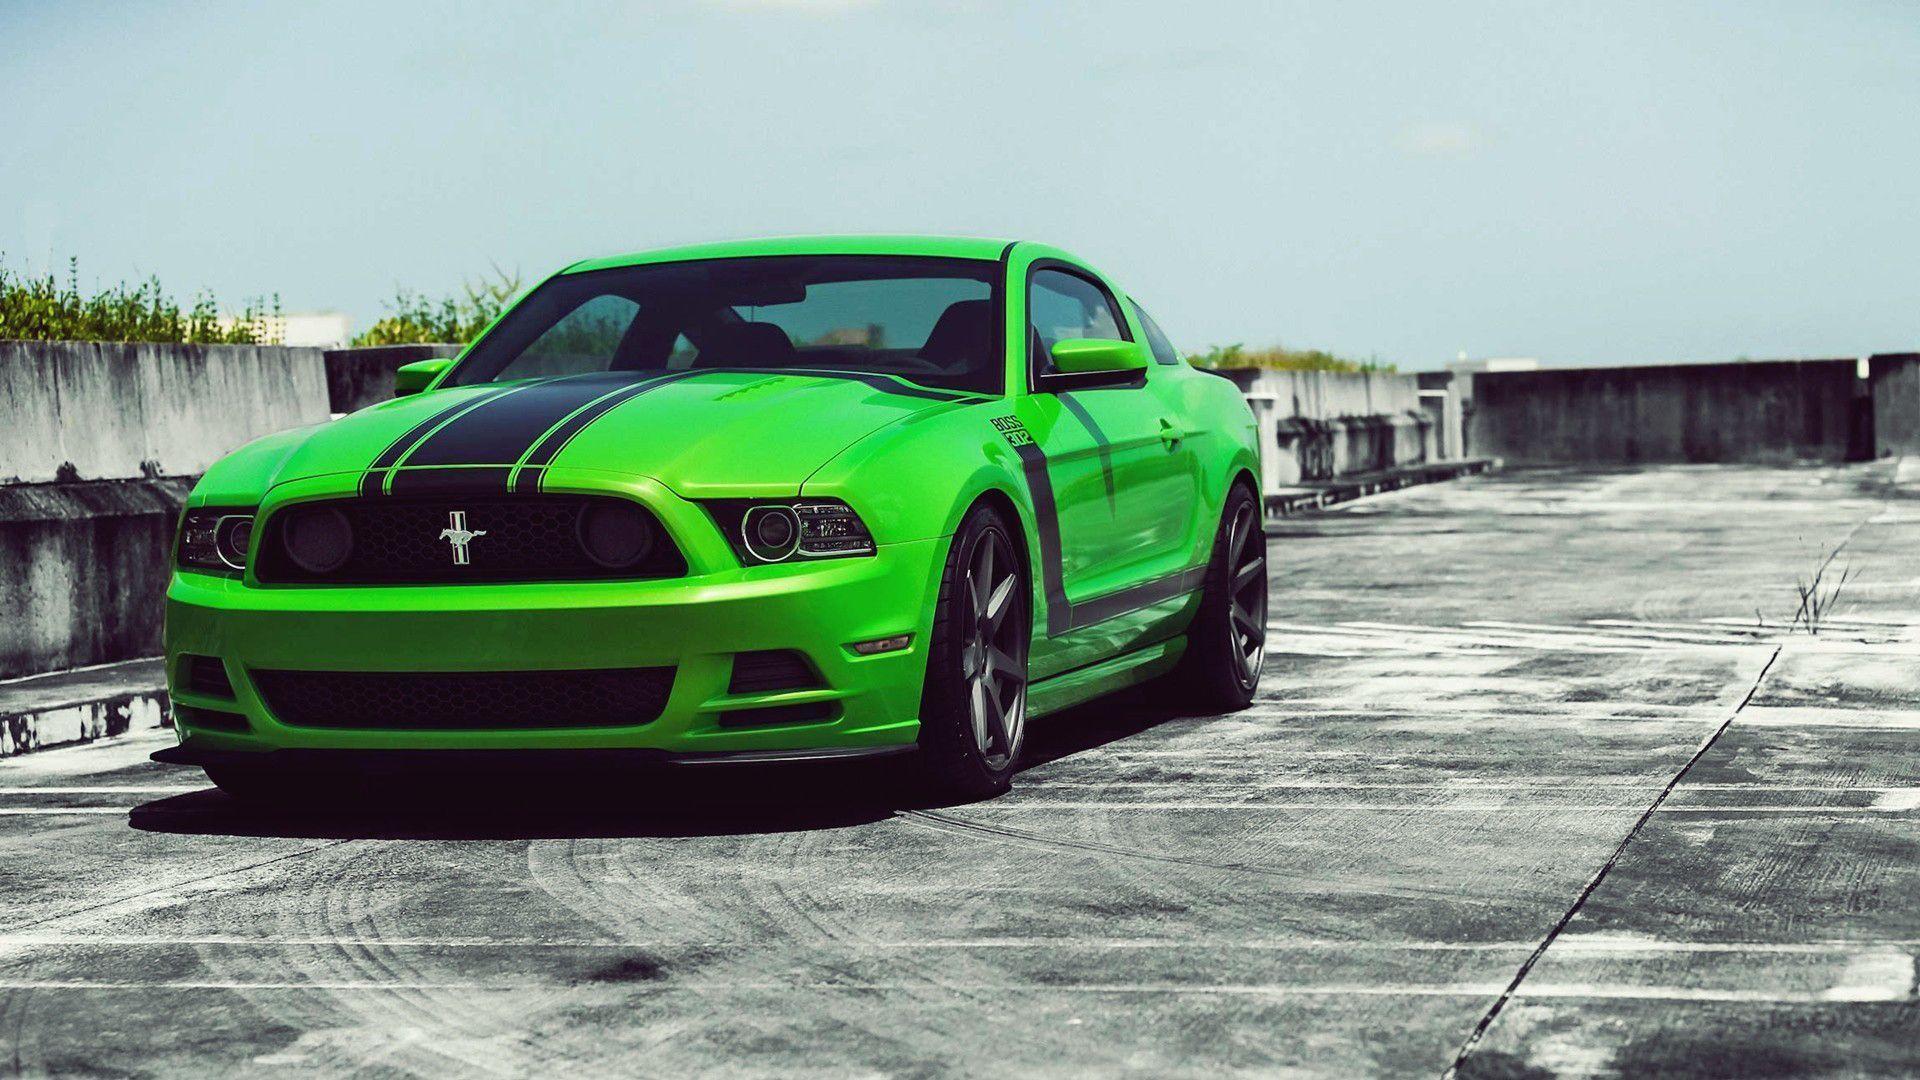 FORD. Ford Mustang Logo Wallpaper Car. Alifiah Cars Sites